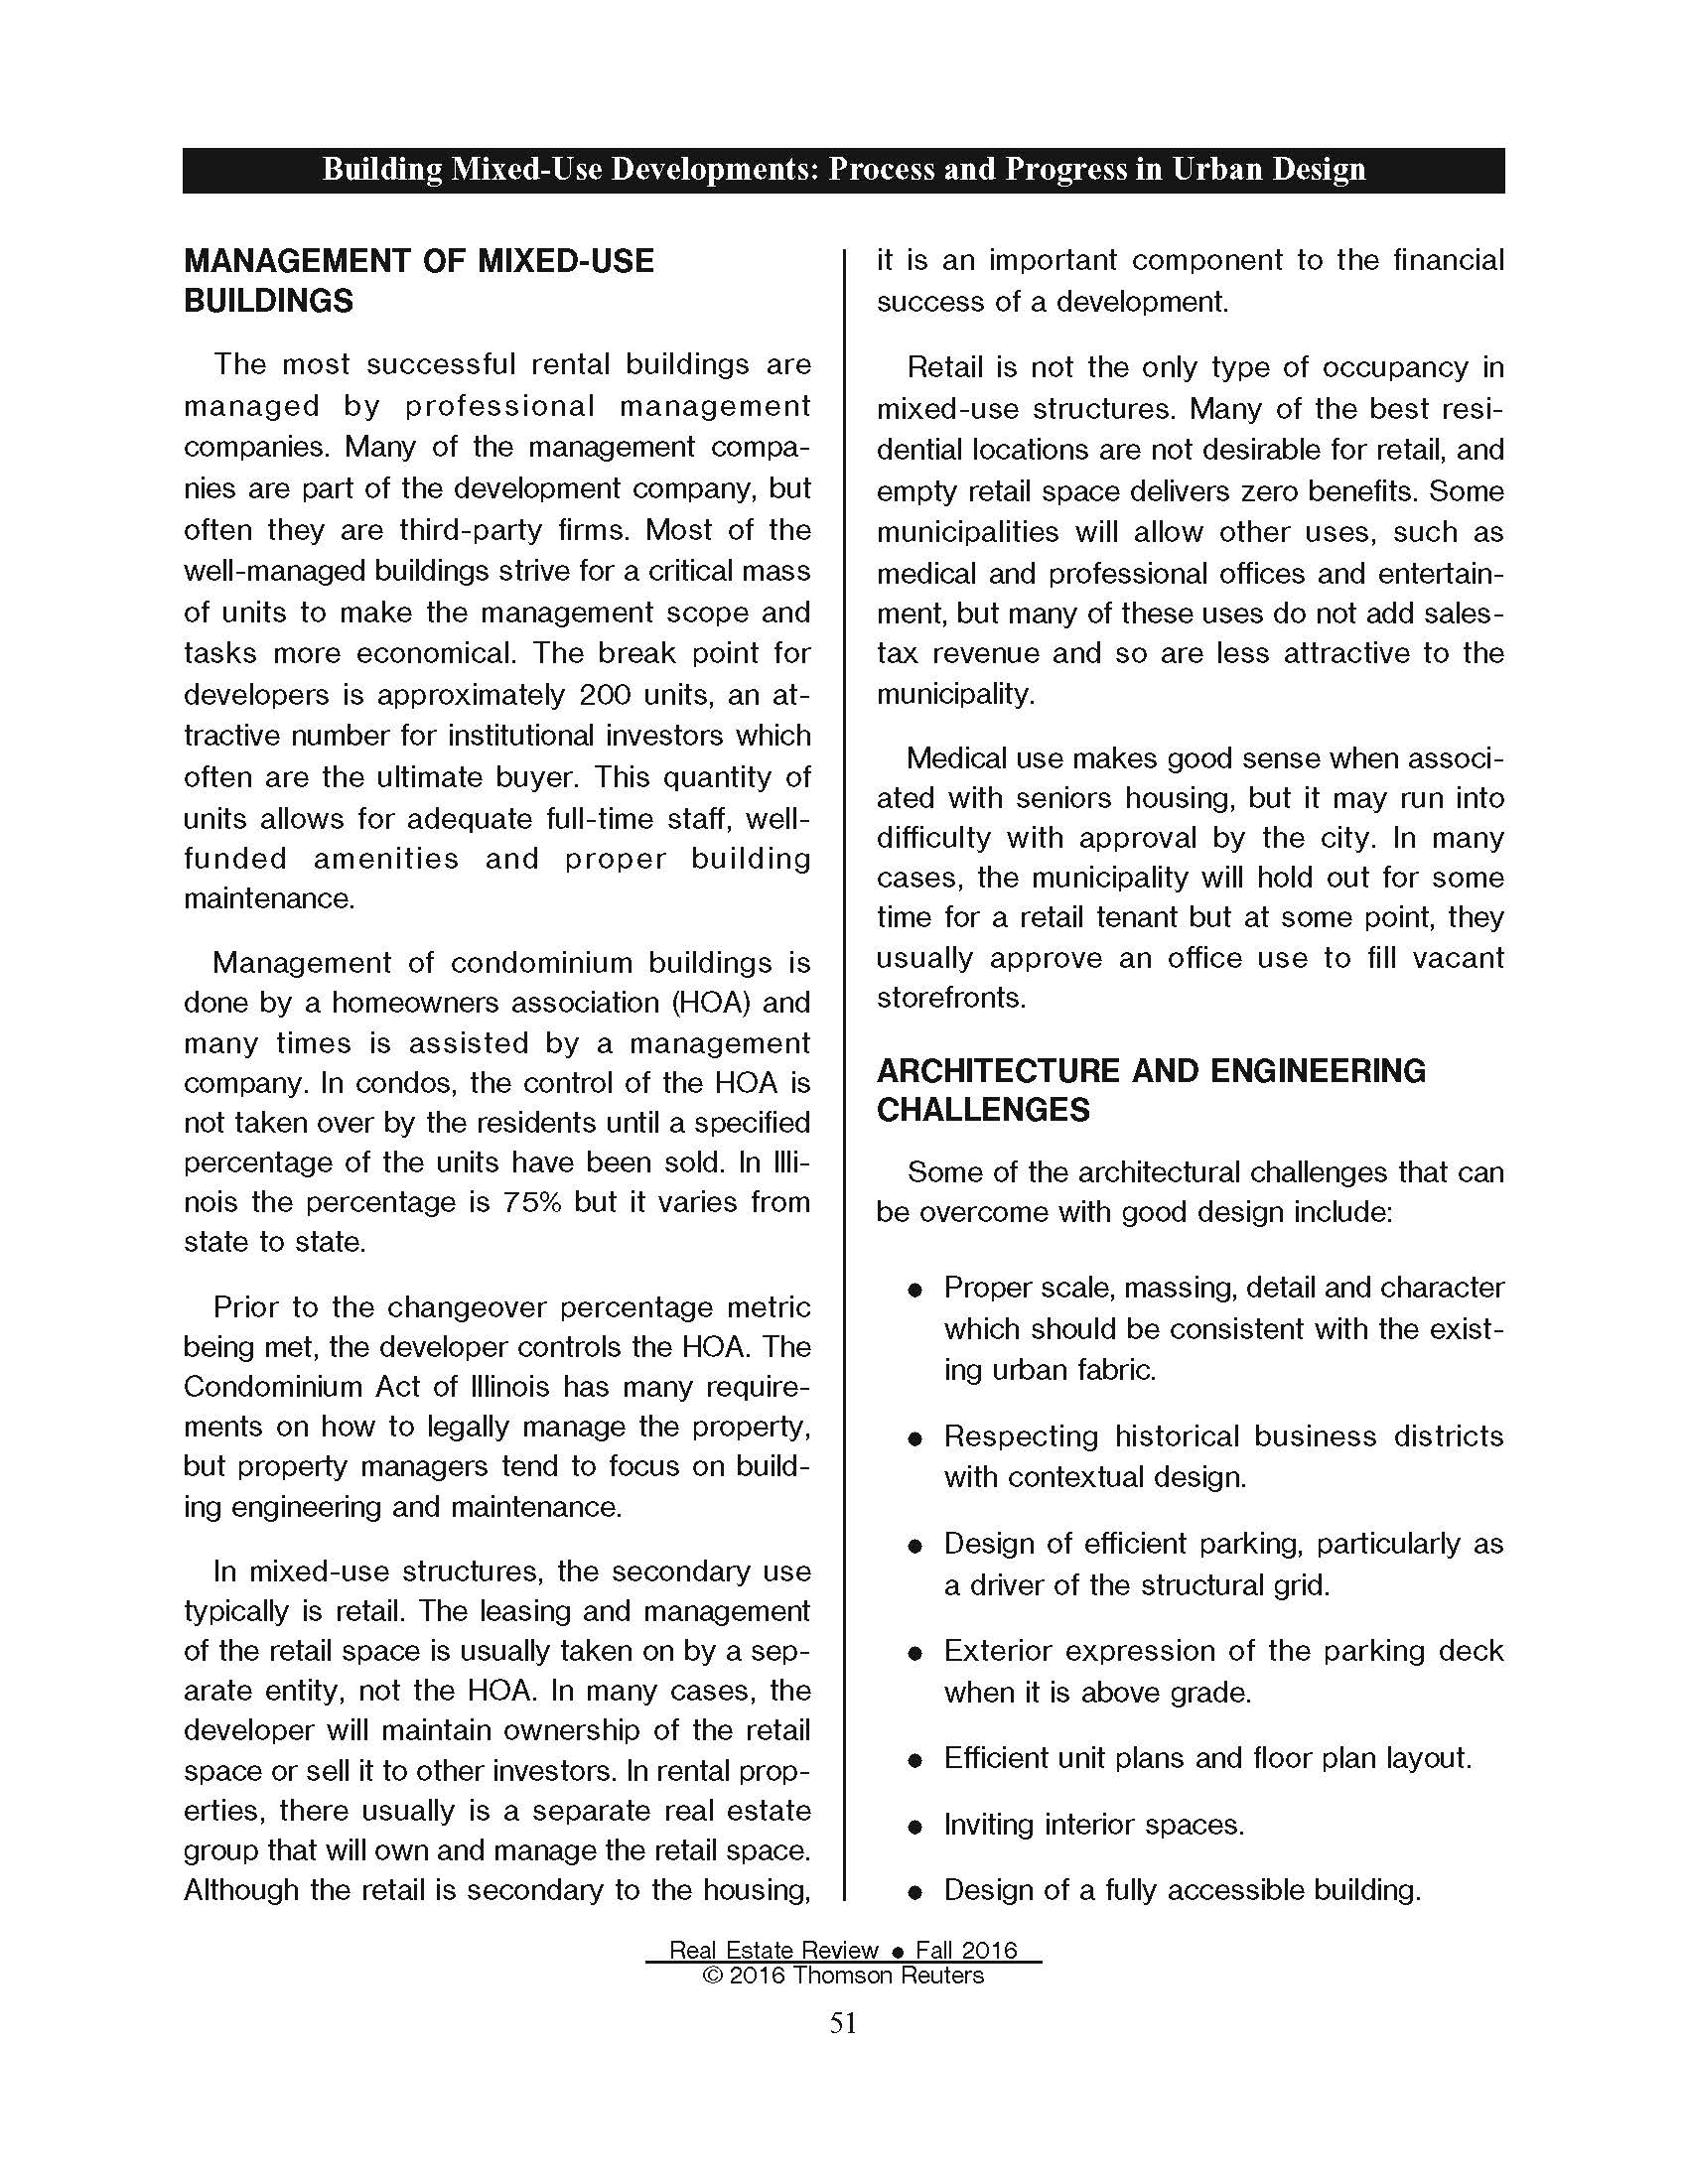 Real Estate Review (Building Mixed-Use Developments Process and Progress in Urban Design) 0916_Page_17